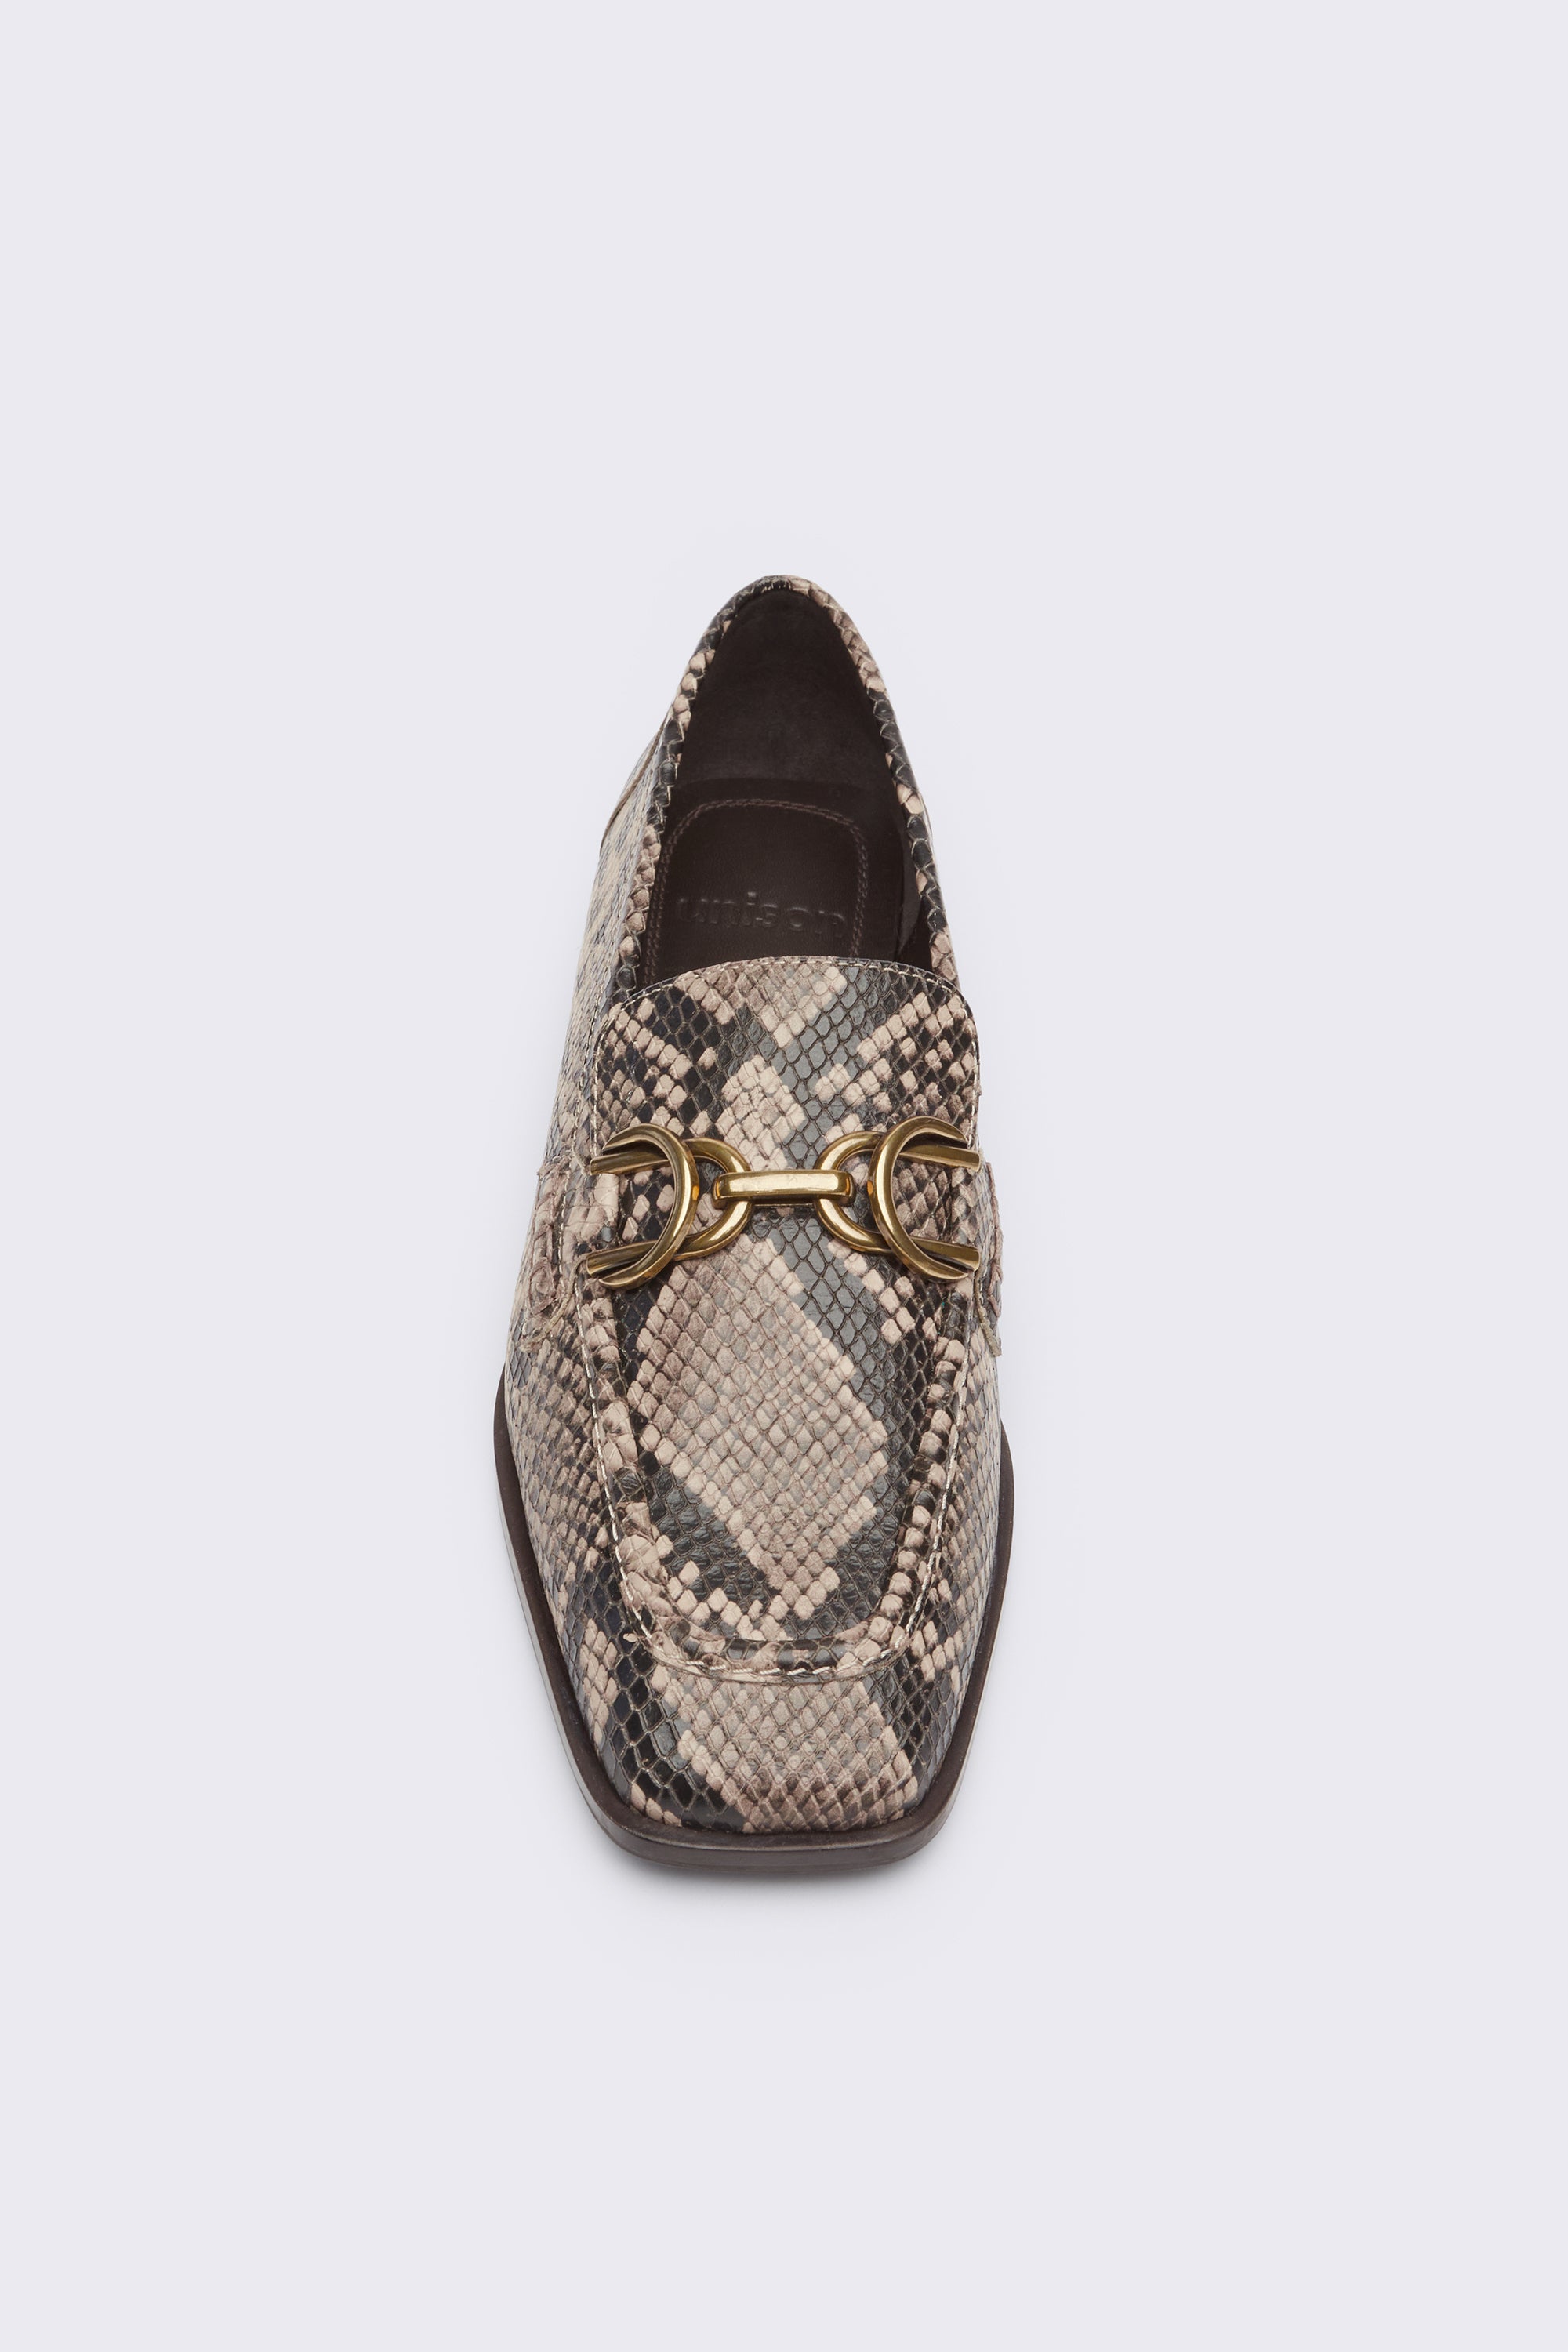 Tribeca Textured Leather Loafer